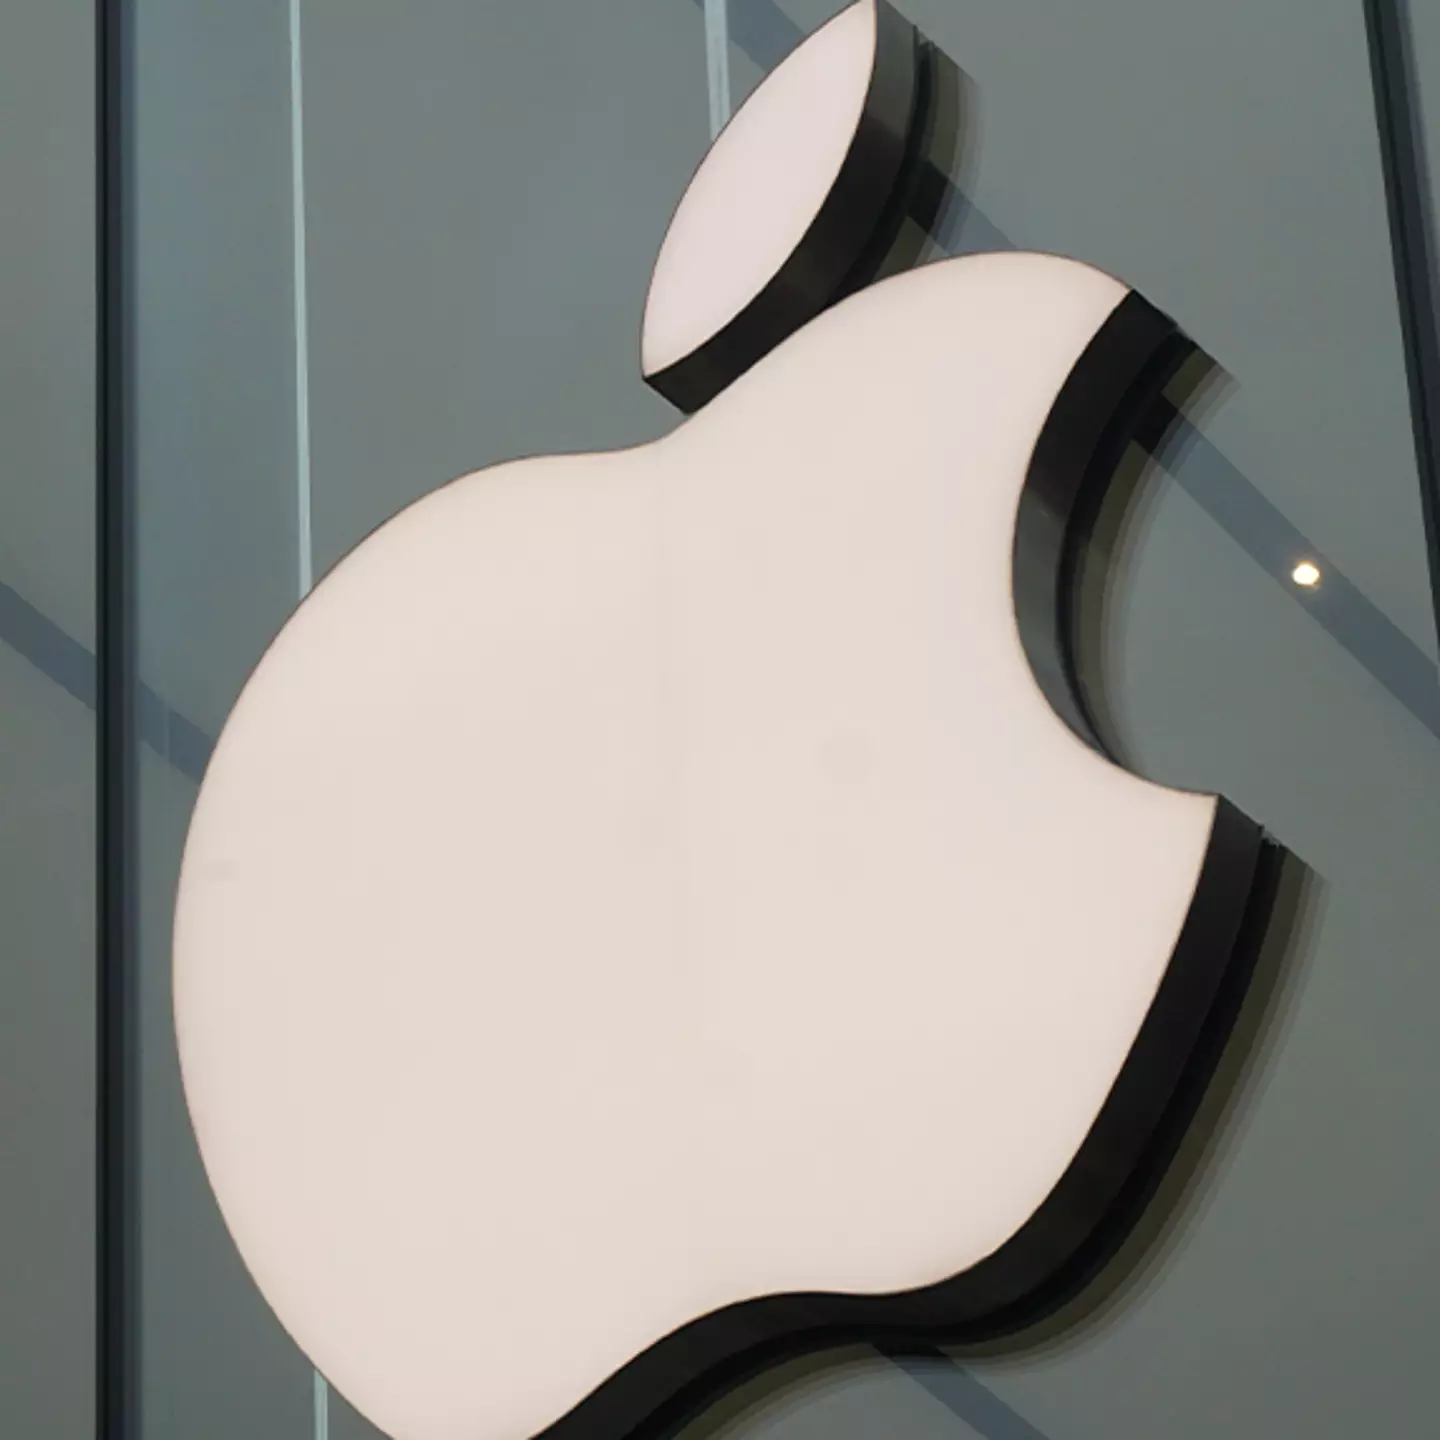 Incredible reason why the Apple logo has a bite taken out of it